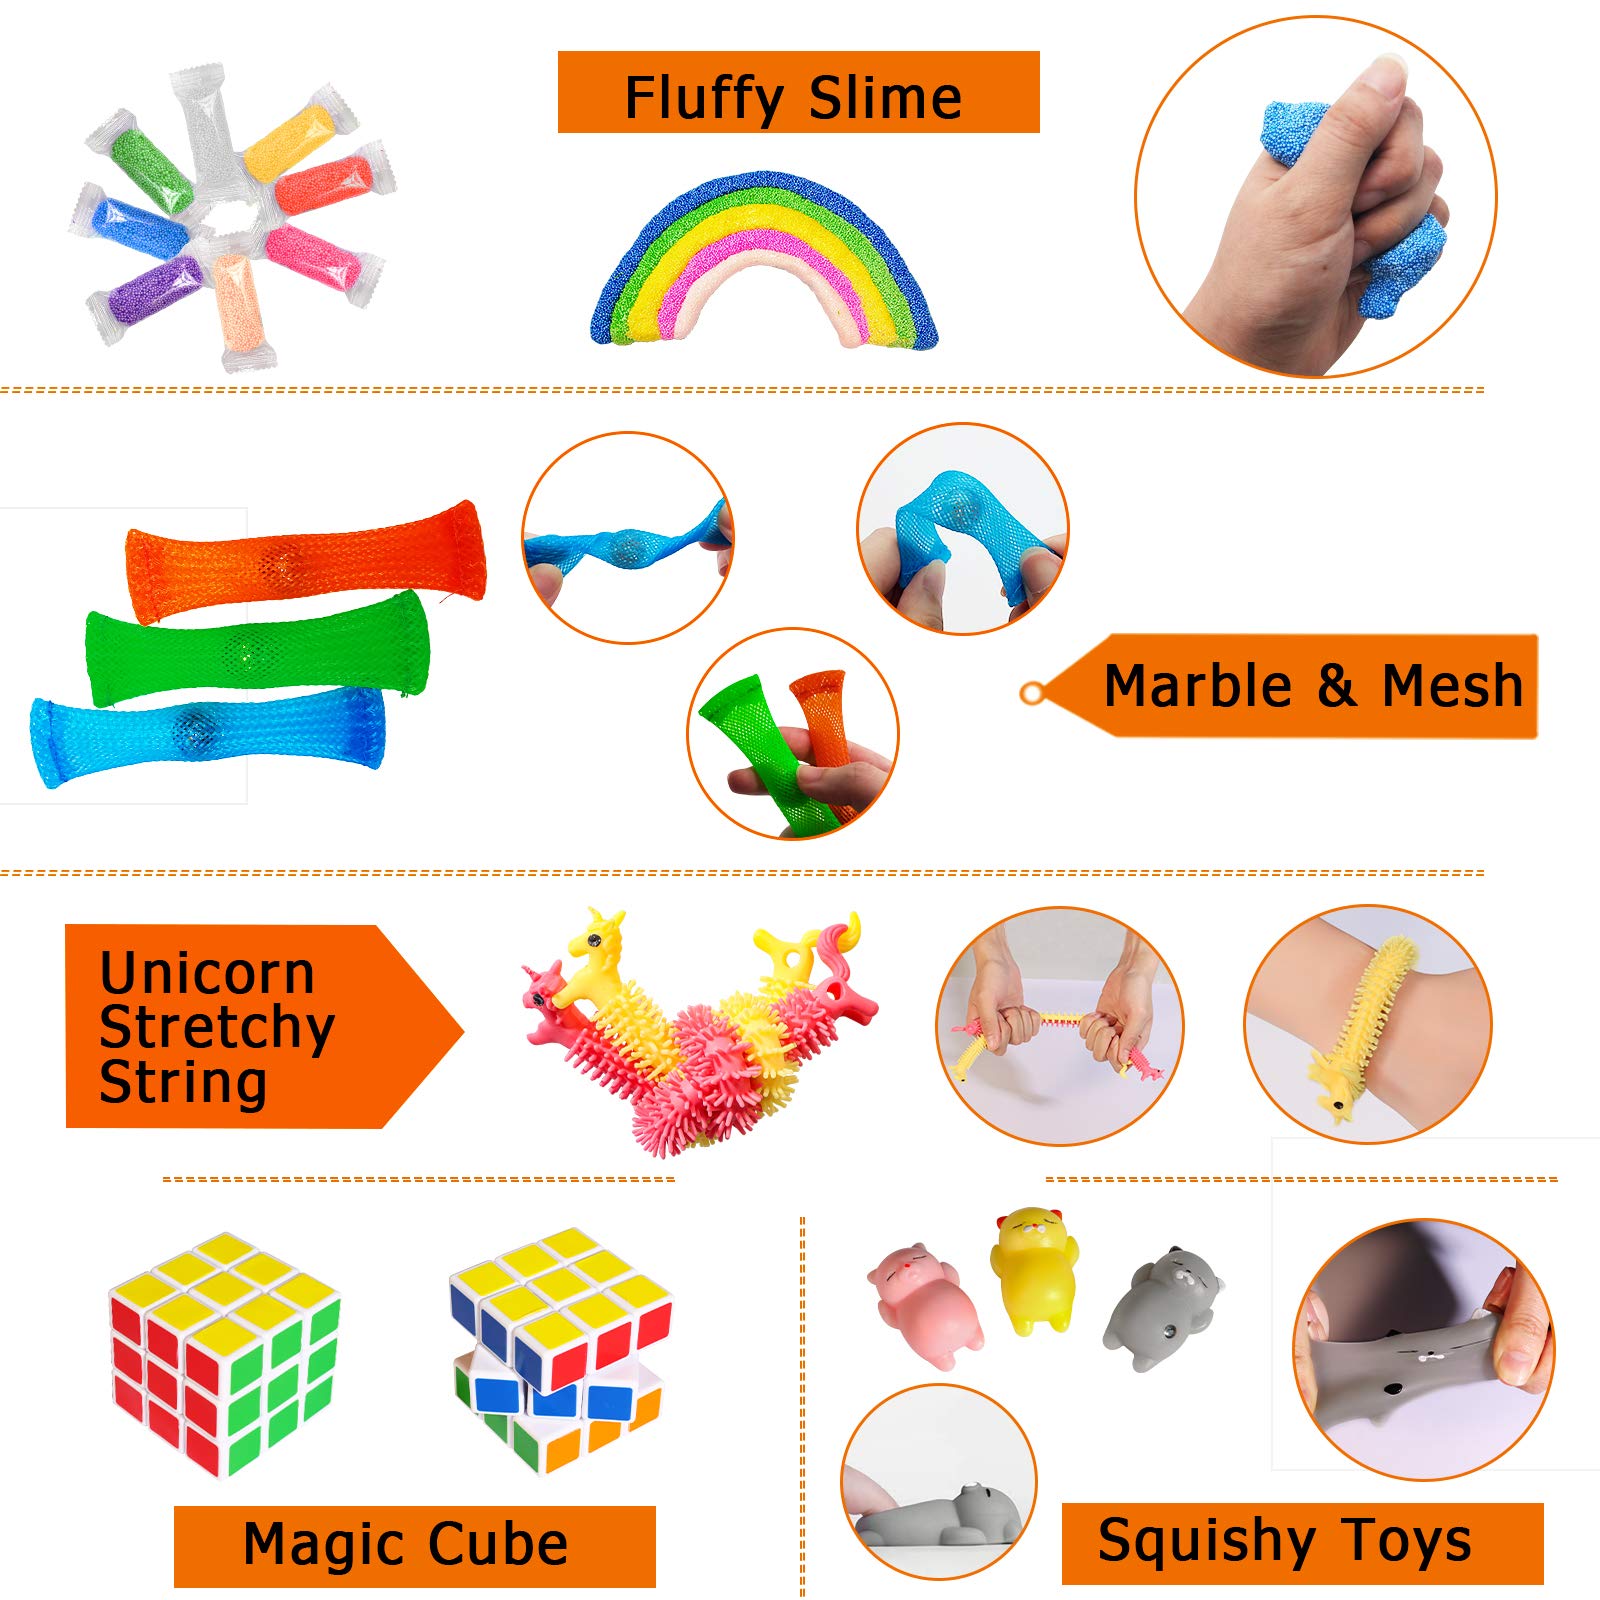 Kidcia Fidget Toys, 35 PCS Sensory Toys for Adults / Kids / ADHD / Autistic / ADD / OCD to Release Anxiety / Autism with Marble Mesh & Liquid Motion Timer, Gifts for Birthday / Classroom Reward